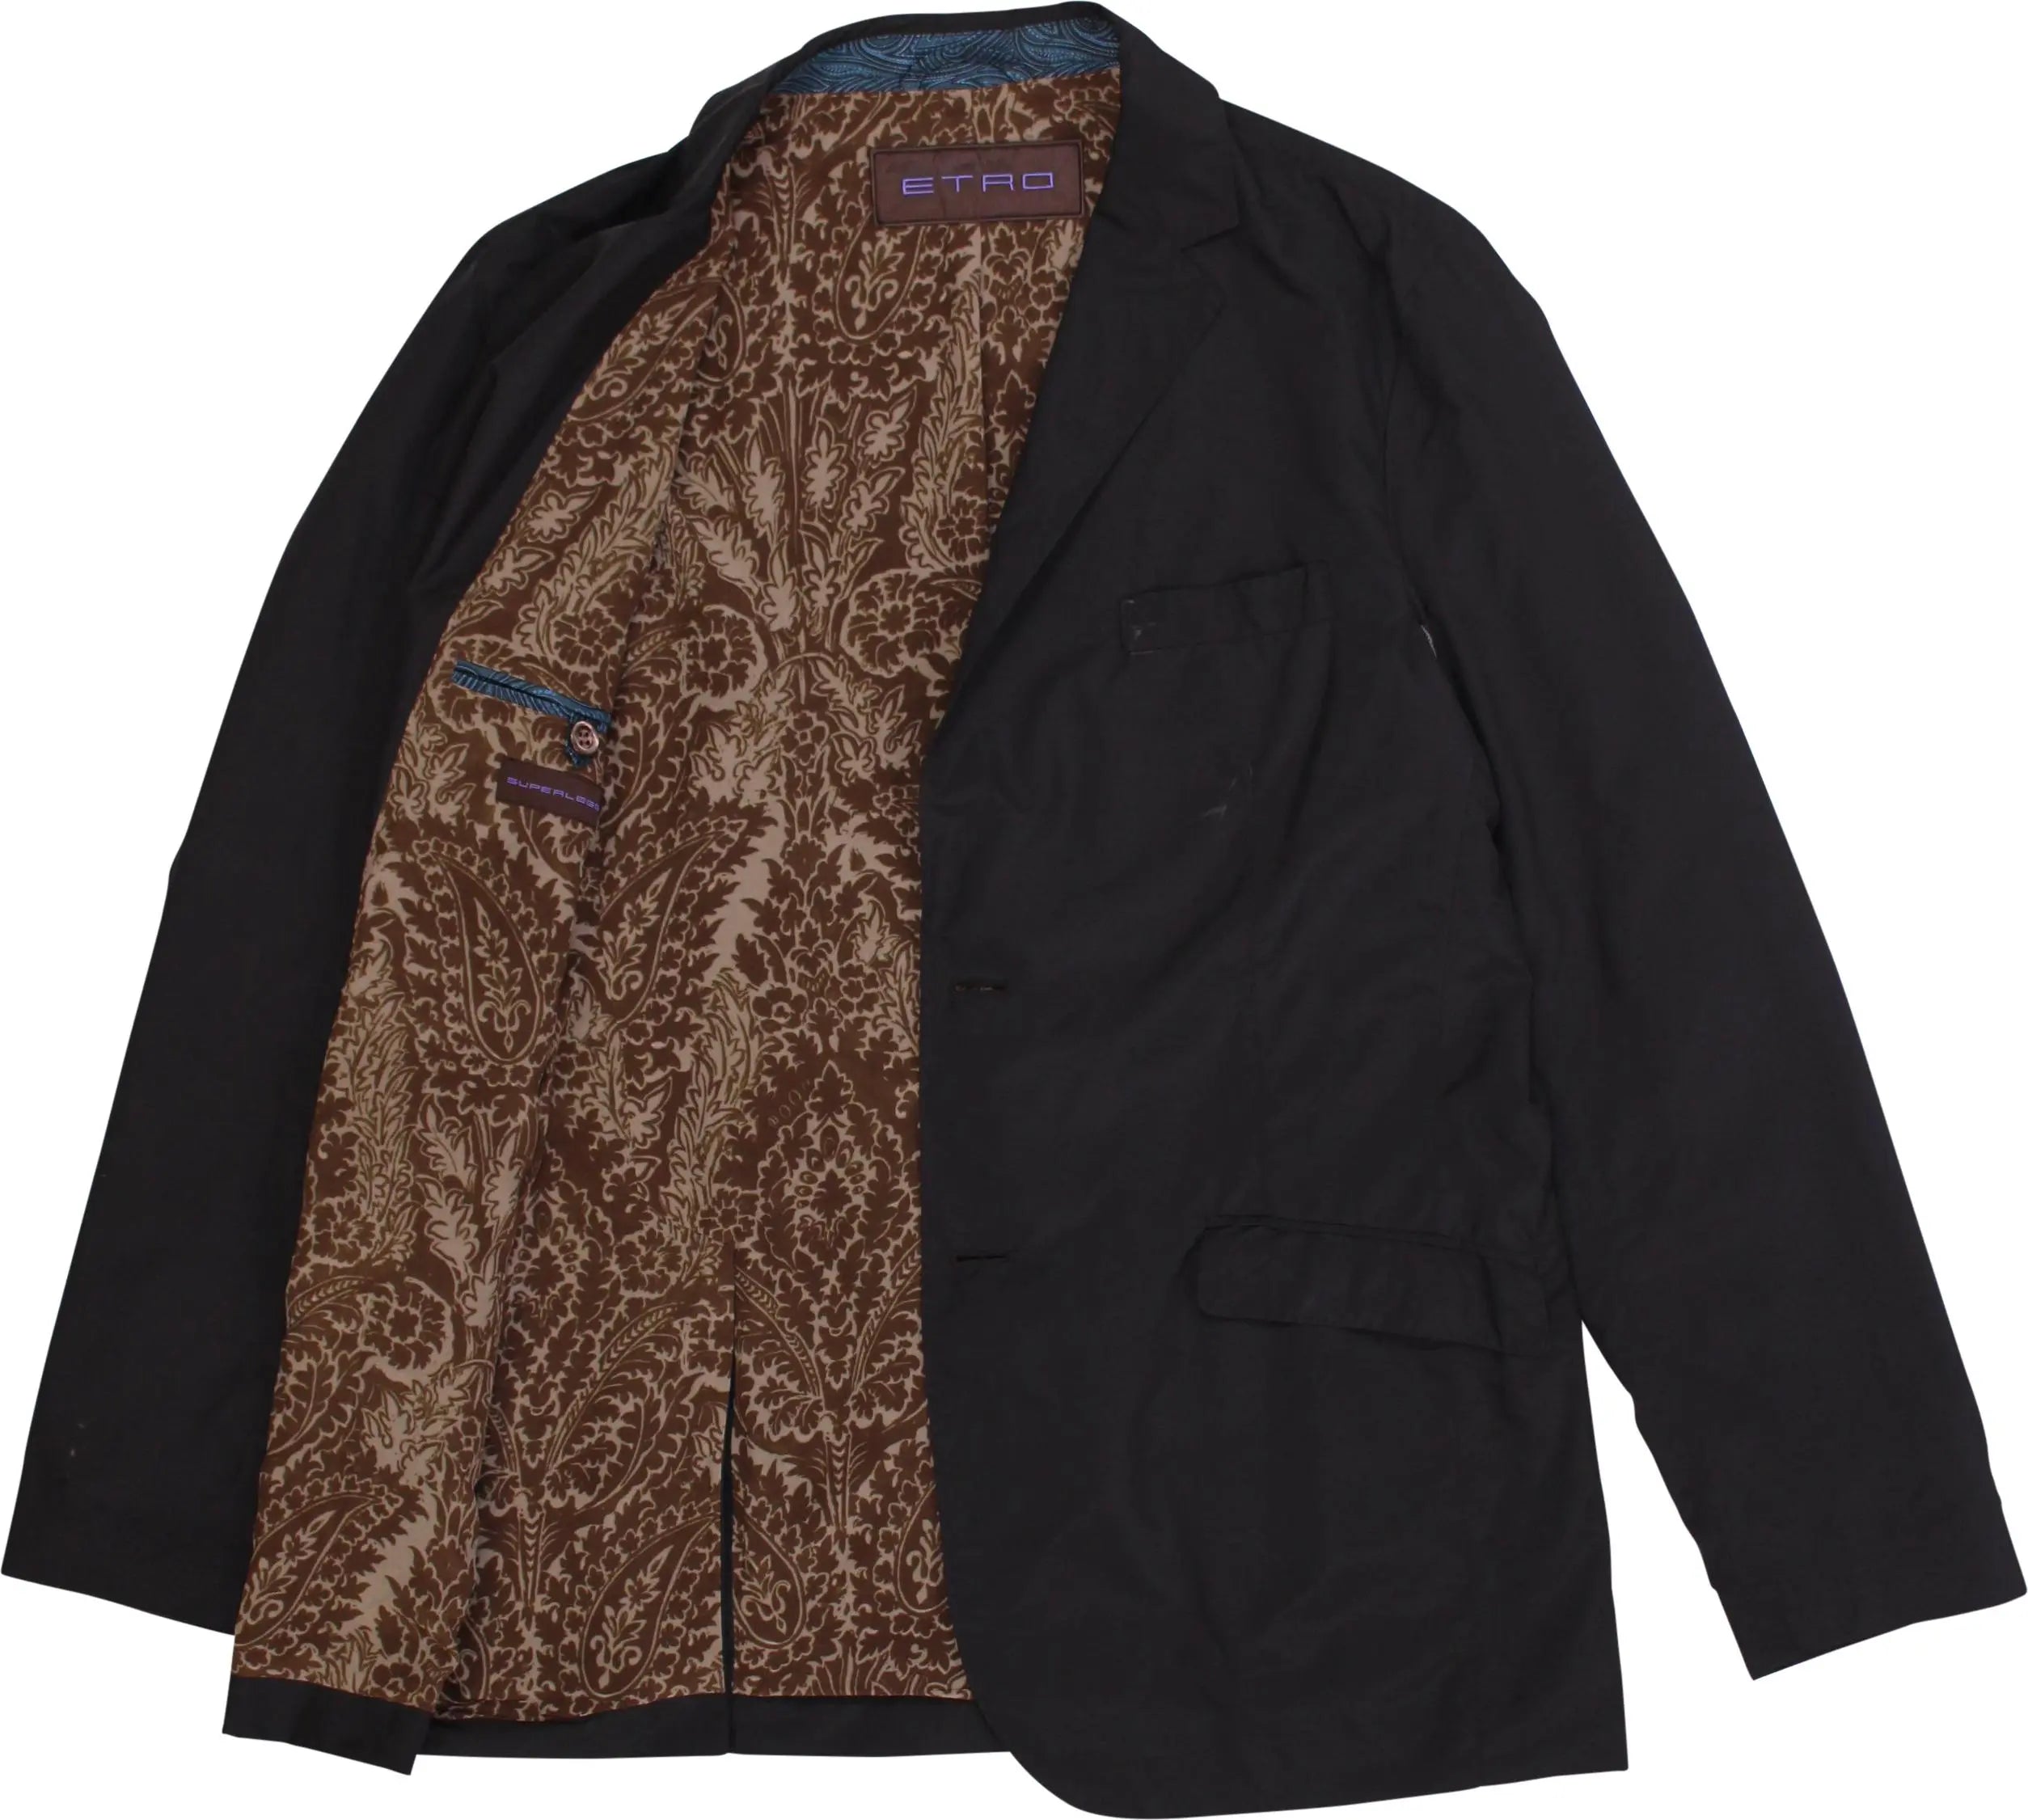 ETRO - Black Nylon Jacket by Etro- ThriftTale.com - Vintage and second handclothing